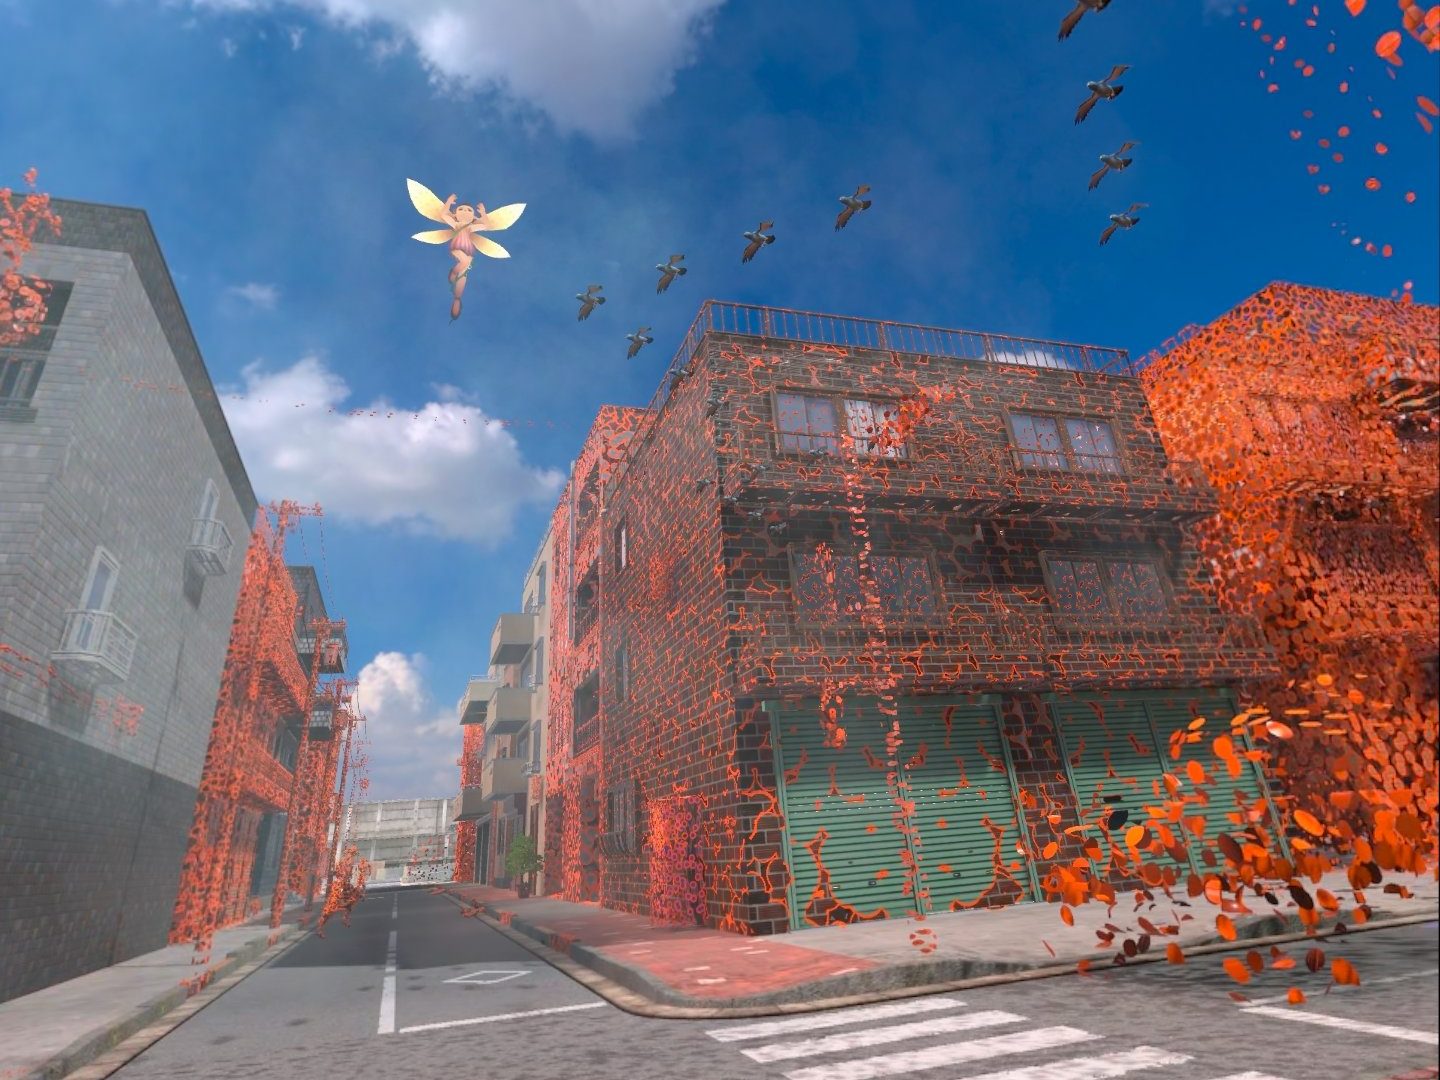 A city view with bright vines, birds flying past, and a fairy floating in the air.